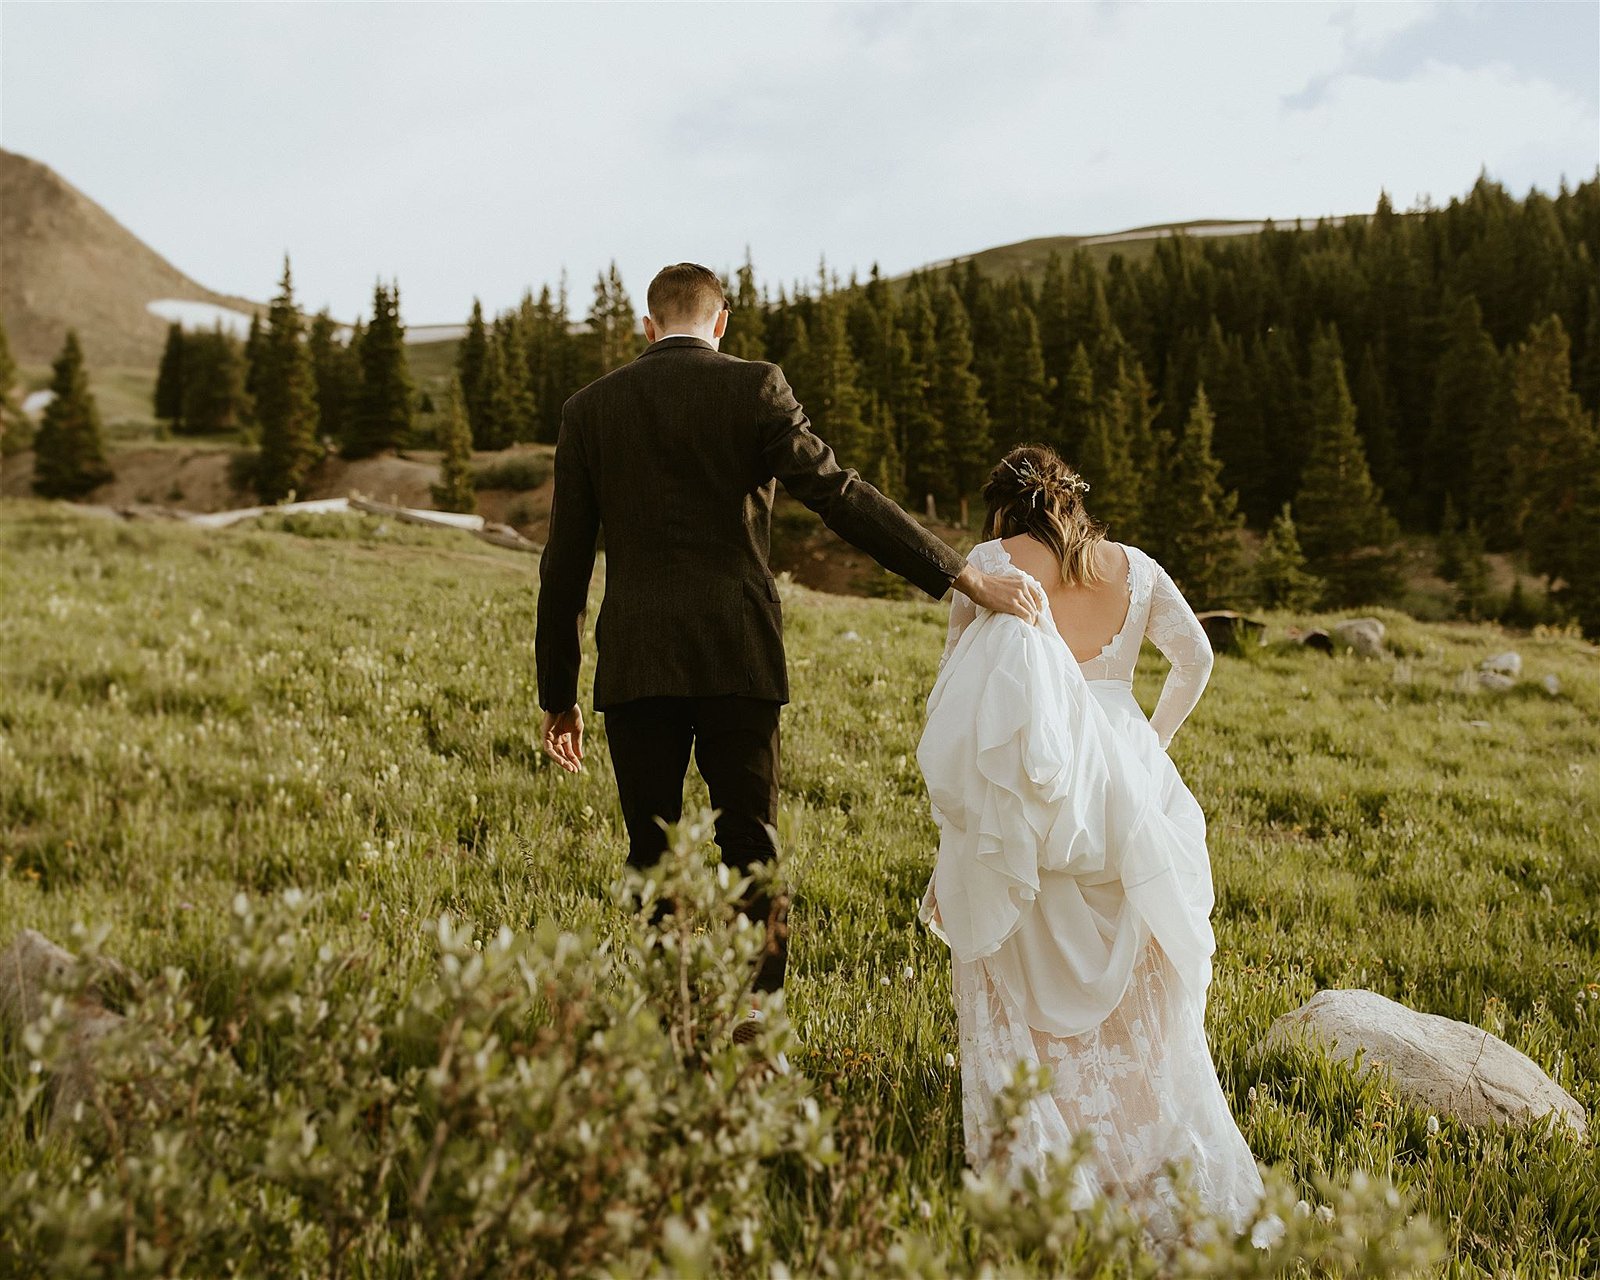 elopement first look, bride and groom hiking, mountain hiking elopement, mayflower gulch elopement, colorado wildflowers, mayflower gulch mining cabins, leadville colorado elopement